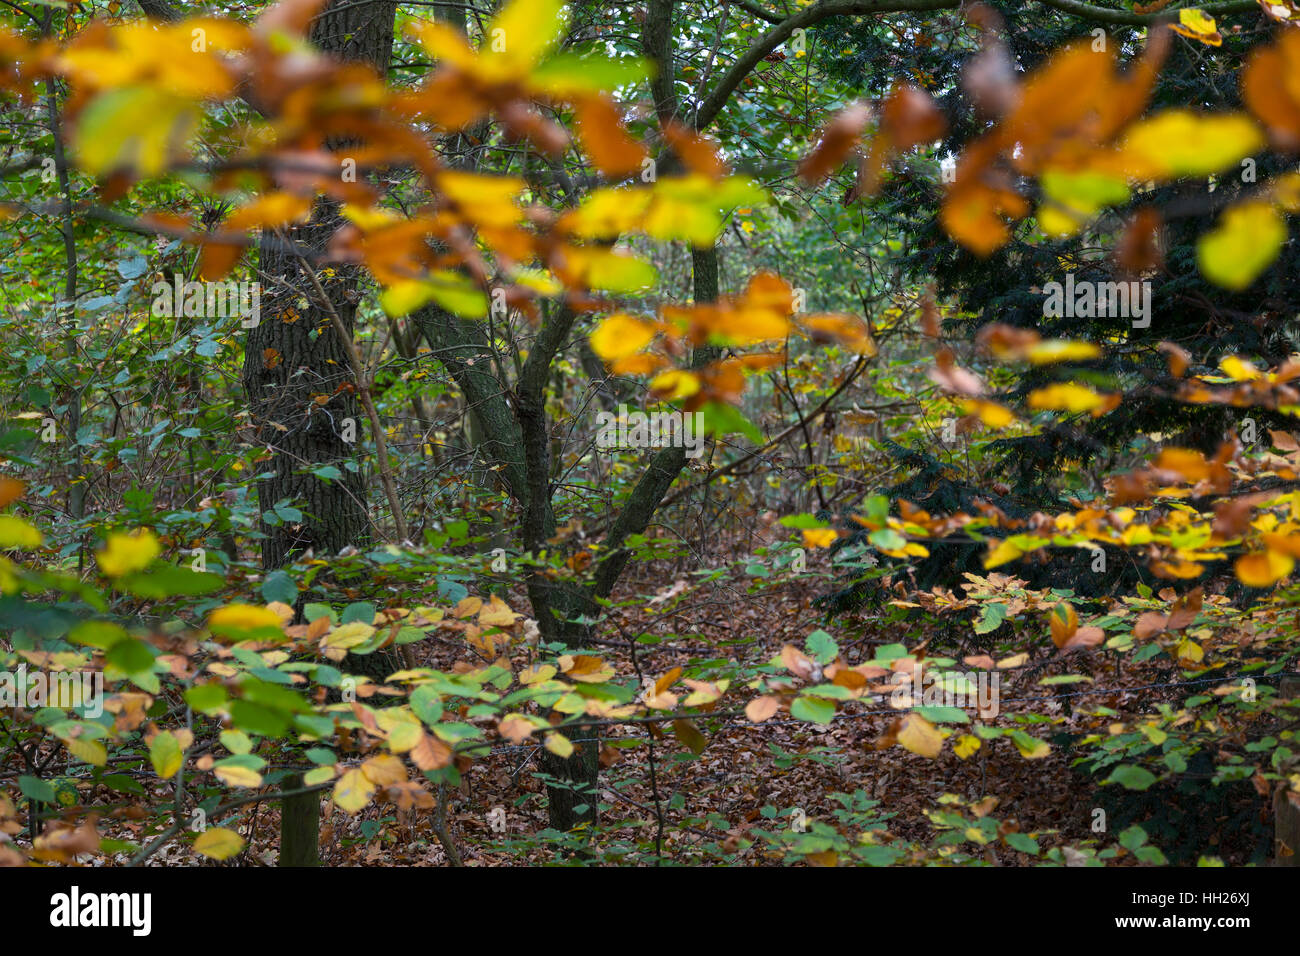 Autumn leaves on a tree close up Stock Photo